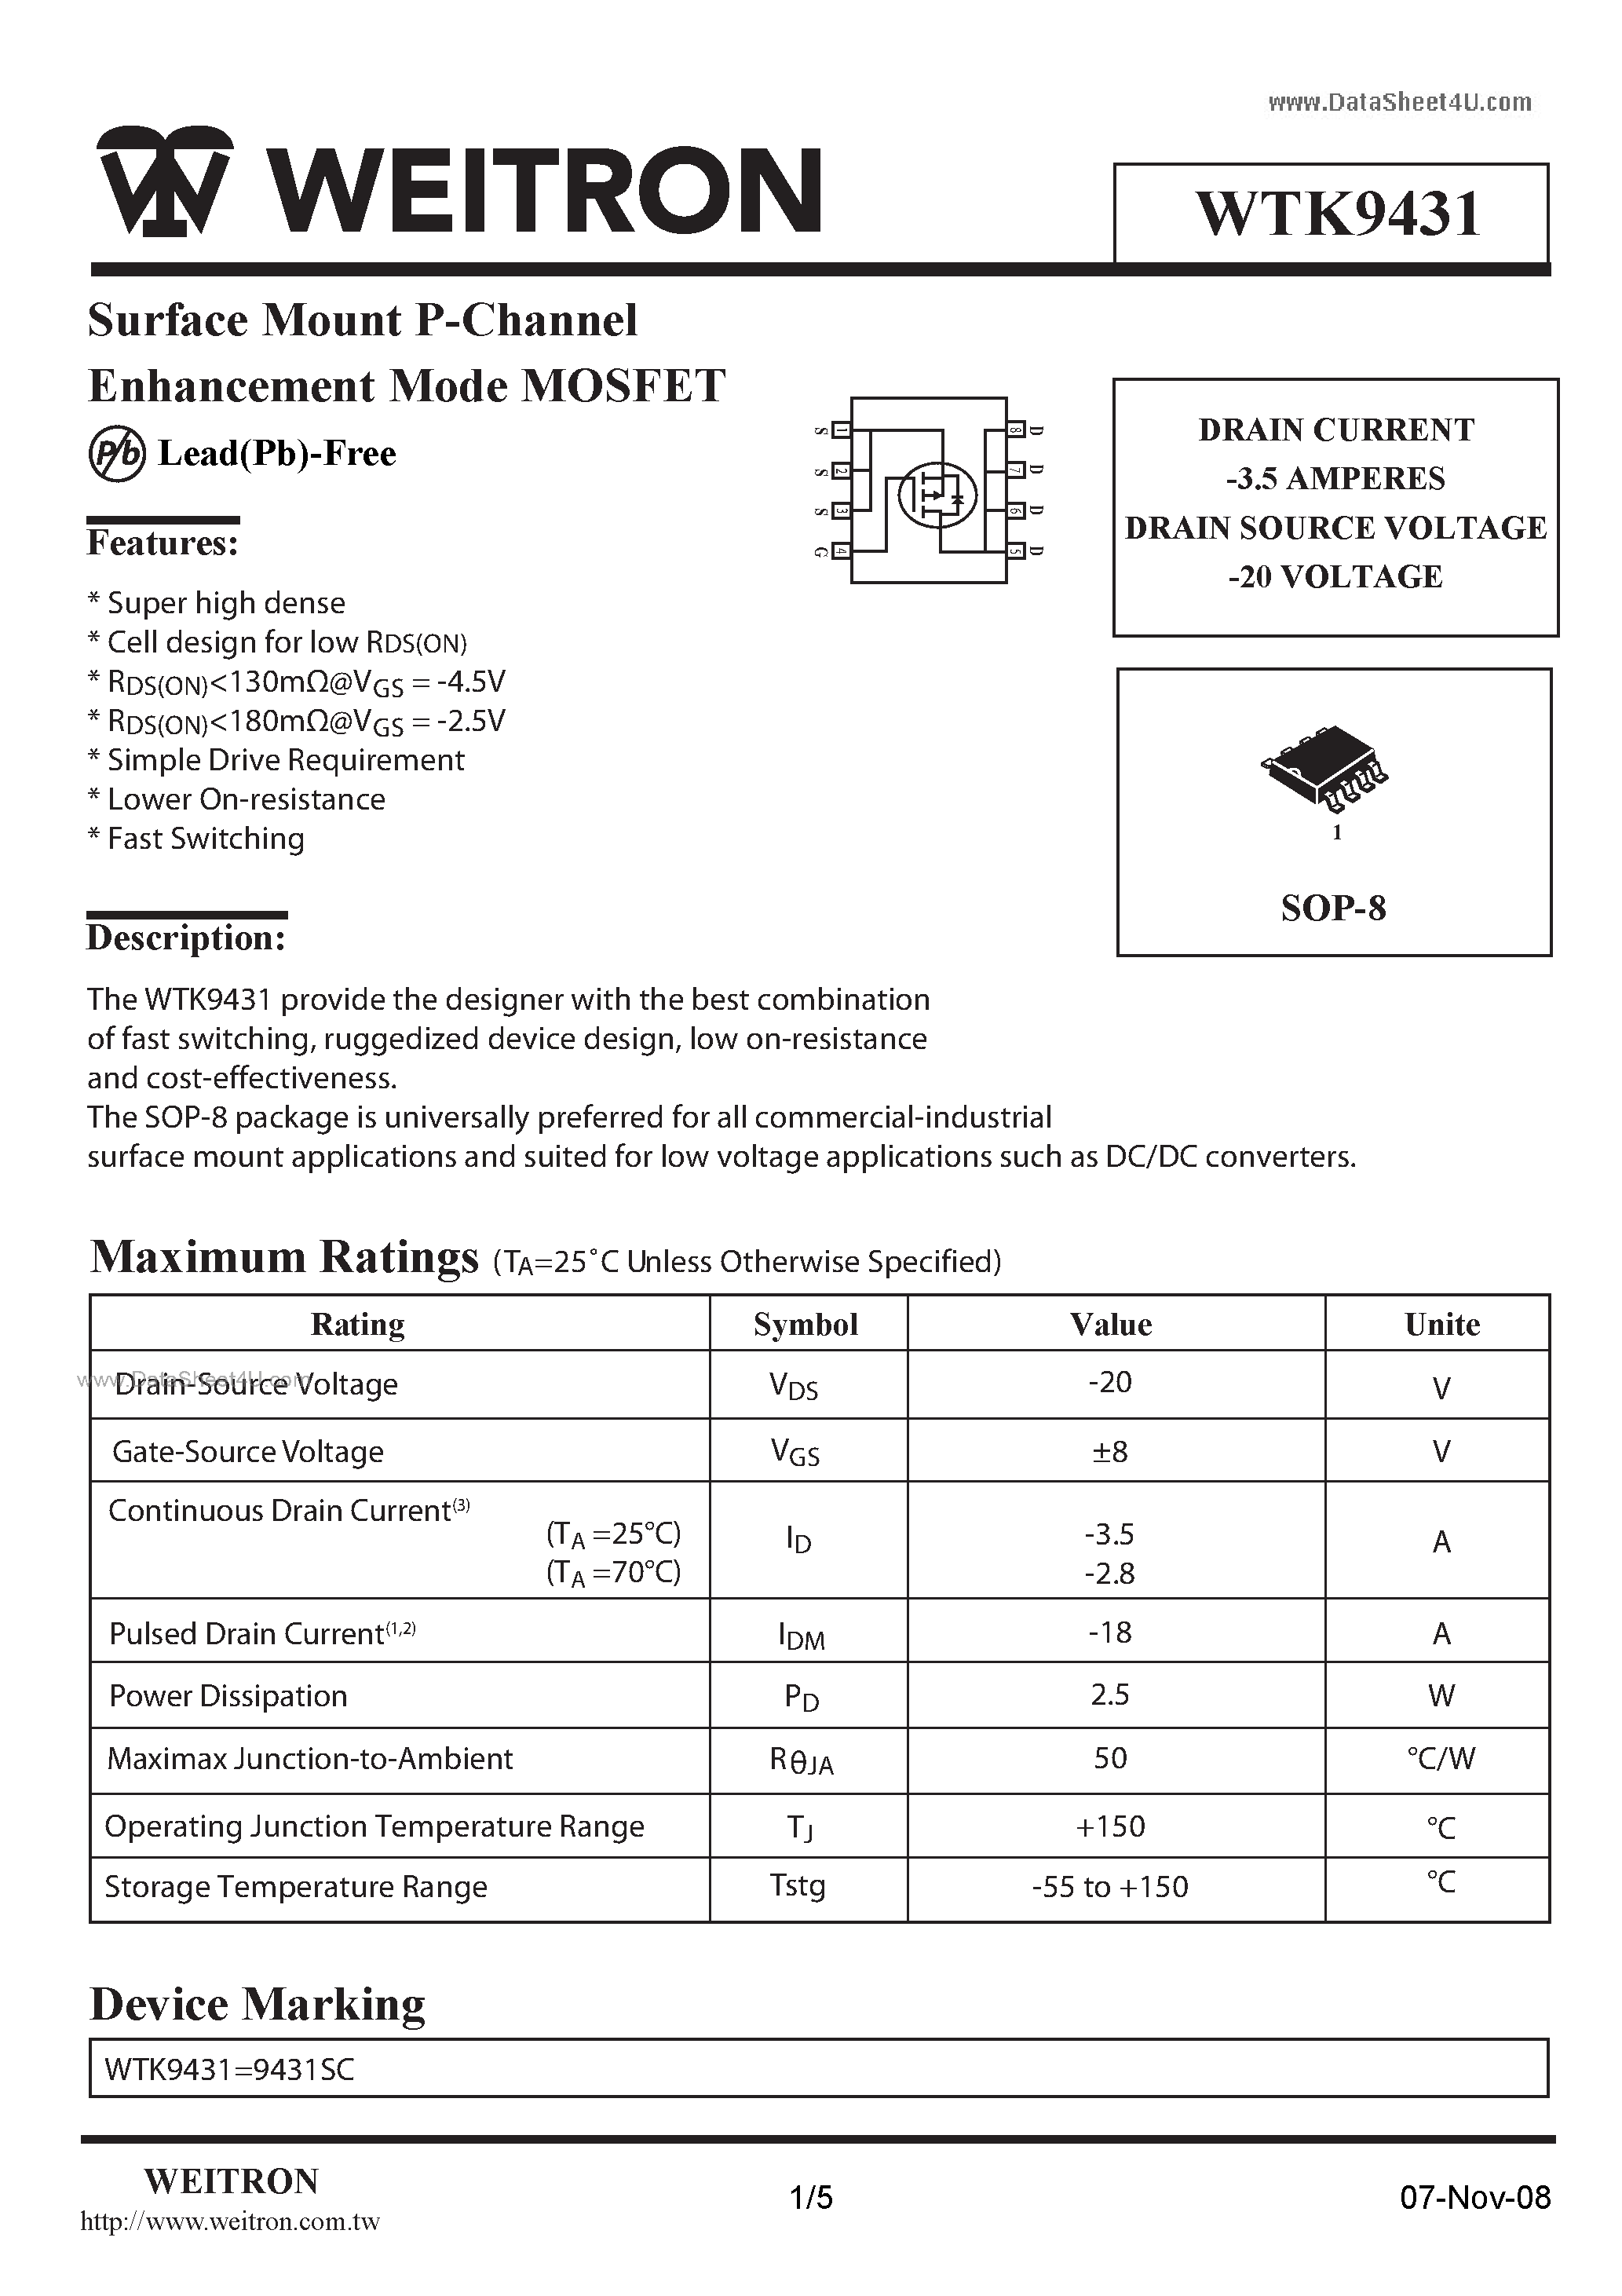 Datasheet WTK9431 - Surface Mount P-Channel Enhancement Mode MOSFET page 1